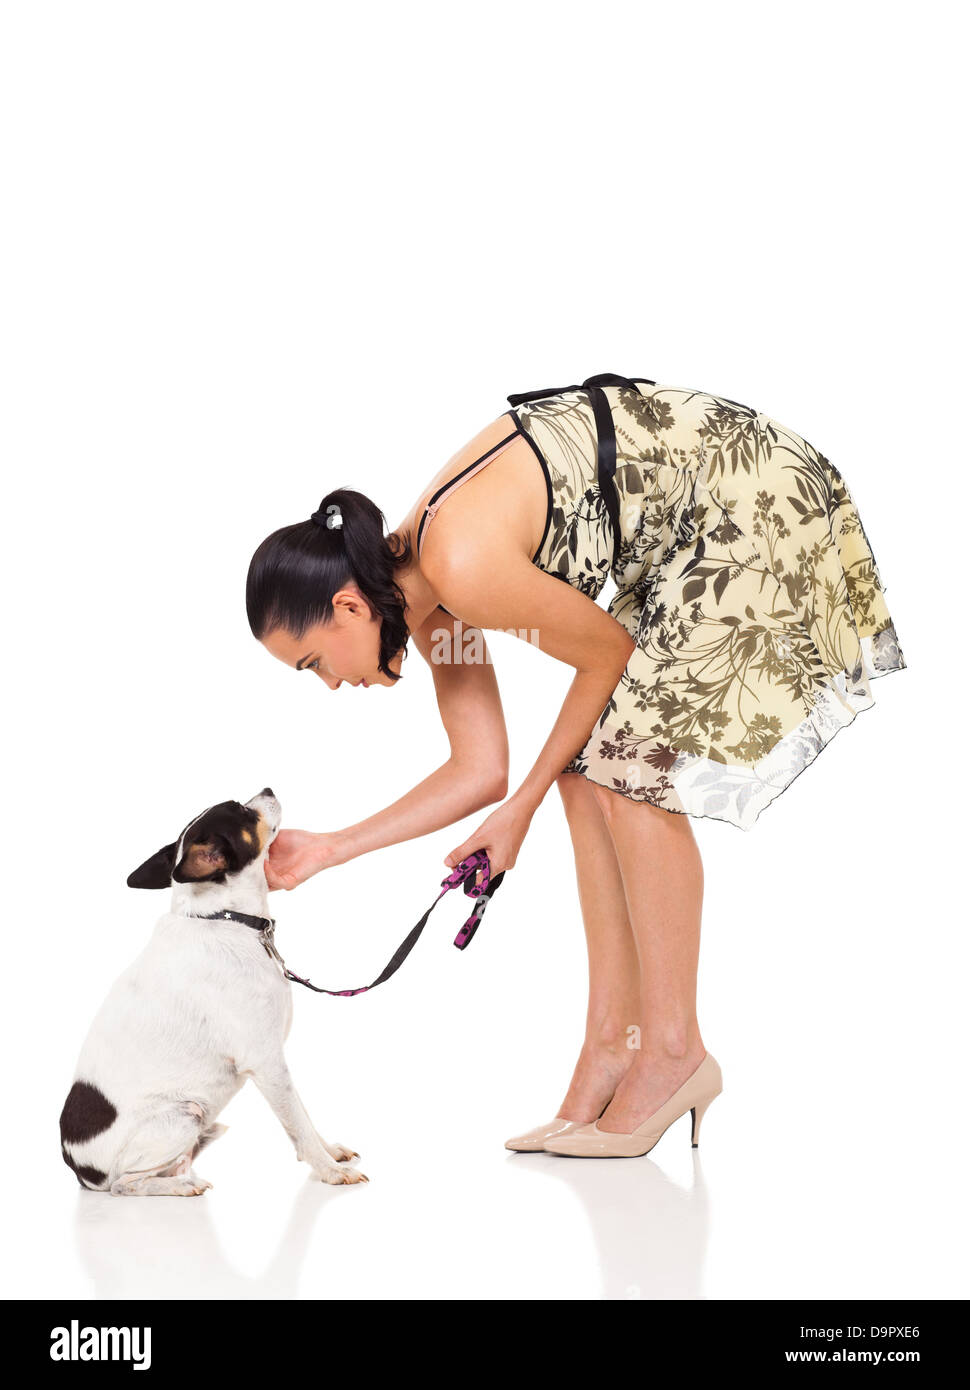 caring female pet owner playing with her dog over white background Stock Photo